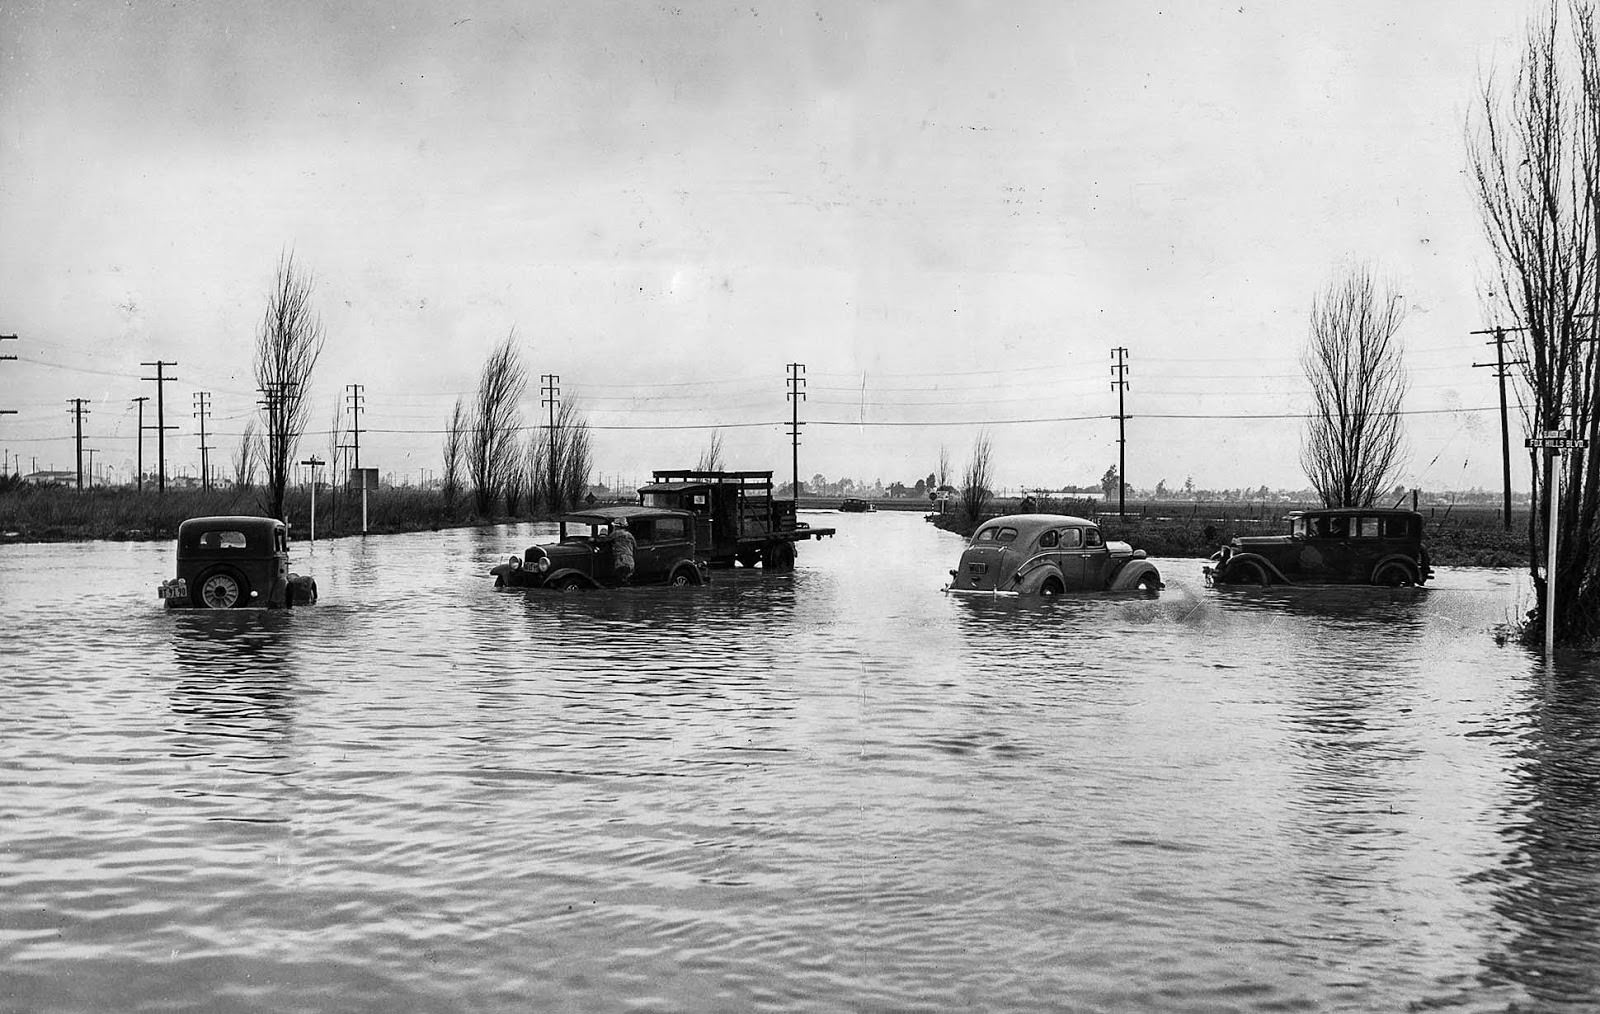 Autos stall in flooded Fox Hills Boulevard and Slauson Avenue after the first storm brought about 4 inches of rain, 1938